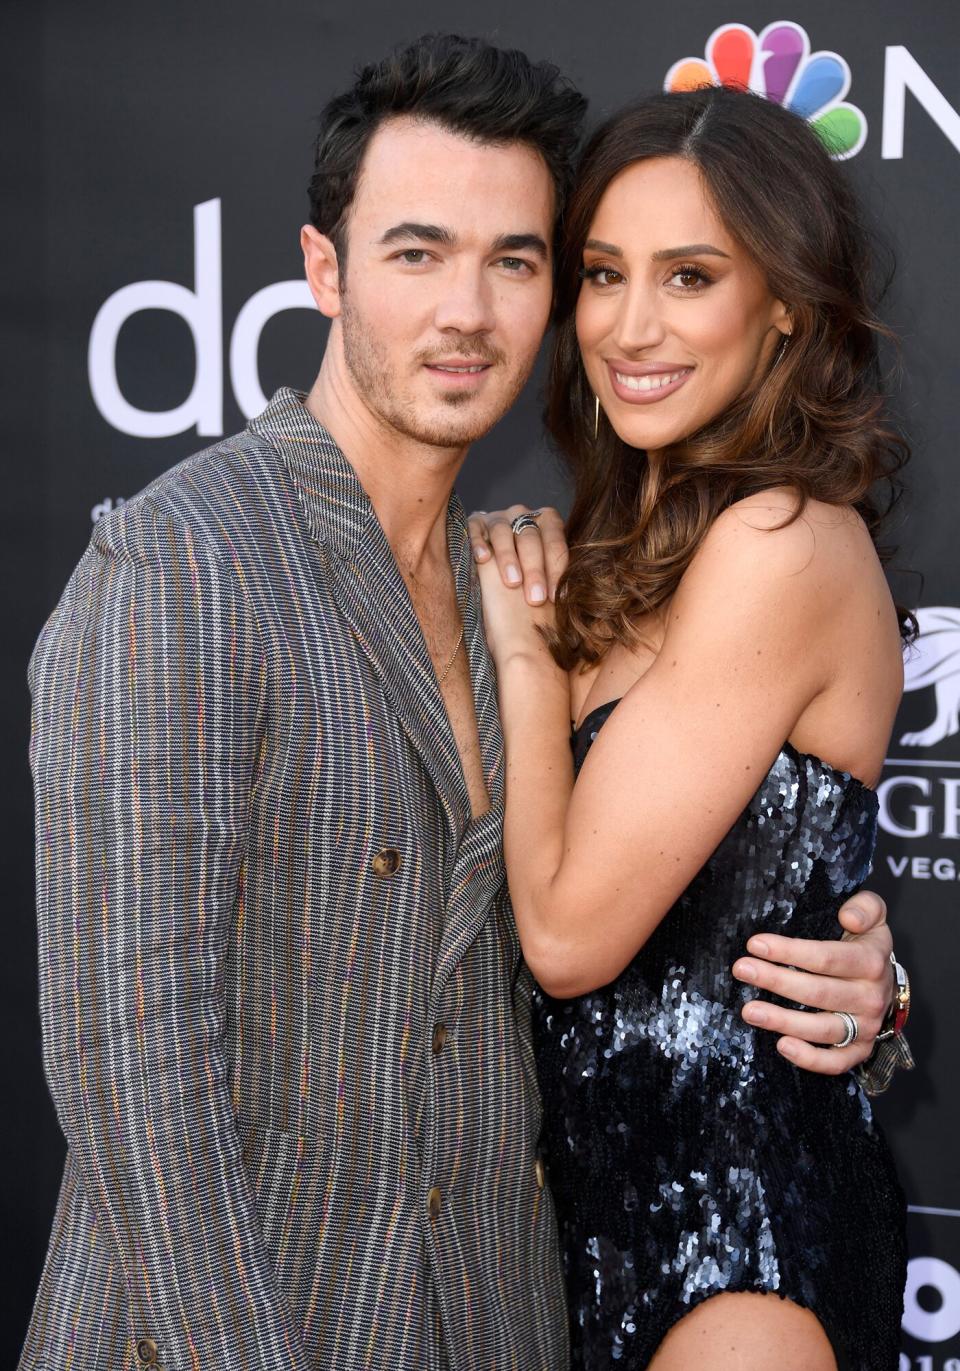 Kevin Jonas of Jonas Brothers ans Danielle Jonas attend the 2019 Billboard Music Awards at MGM Grand Garden Arena on May 01, 2019 in Las Vegas, Nevada